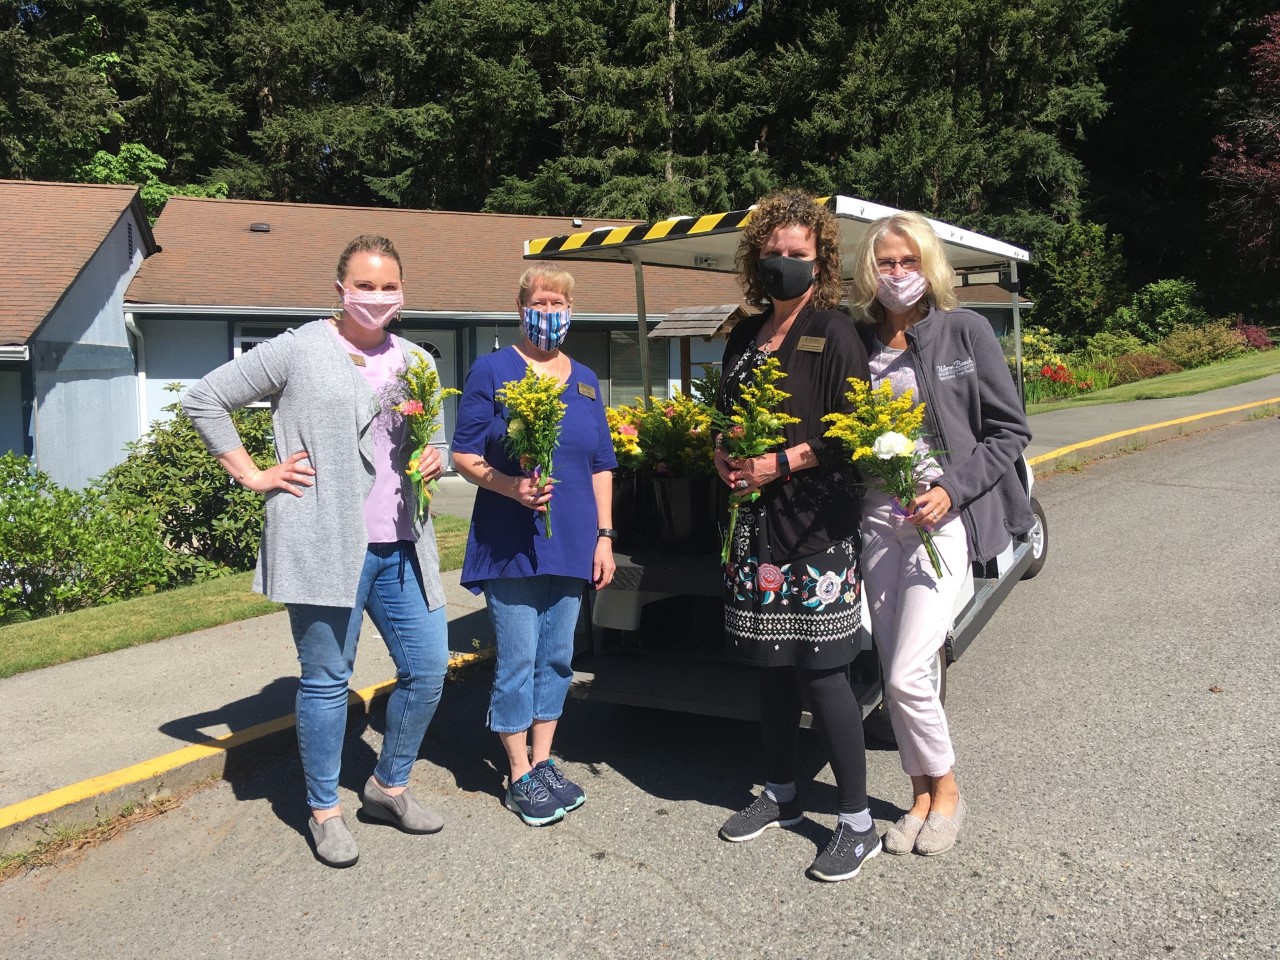 Staff delivering flowers to residents on Mother's day 2020